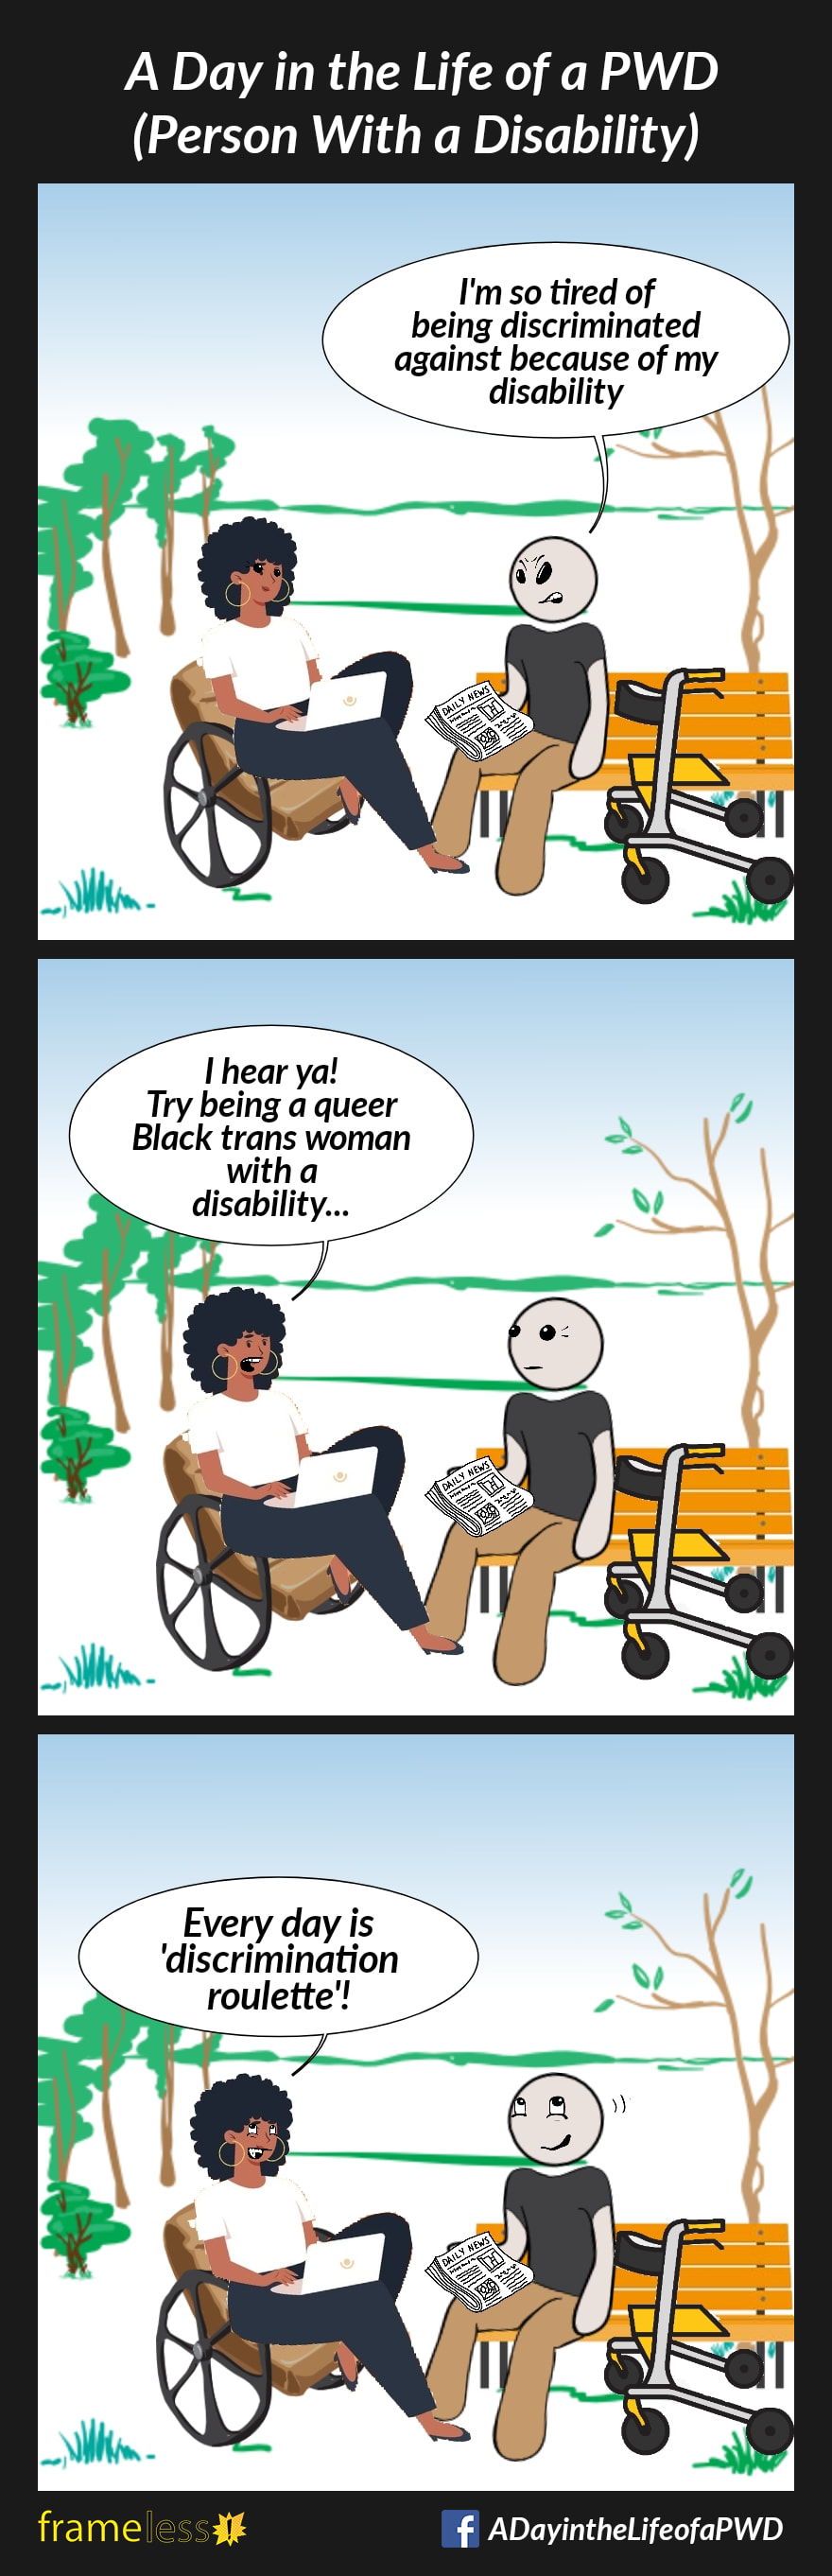 COMIC STRIP 
A Day in the Life of a PWD (Person With a Disability) 

Frame 1:
A man who uses a rollator is sitting on a bench in the park reading a newspaper. A Black woman using a laptop is sitting in her wheelchair next to him.

MAN: I'm so tired of being discriminated against because of my disability 

Frame 2:
WOMAN: I hear ya! Try being a queer Black trans woman with a disability...

Frame 3: 
WOMAN: Every day is 'discrimination roulette'!